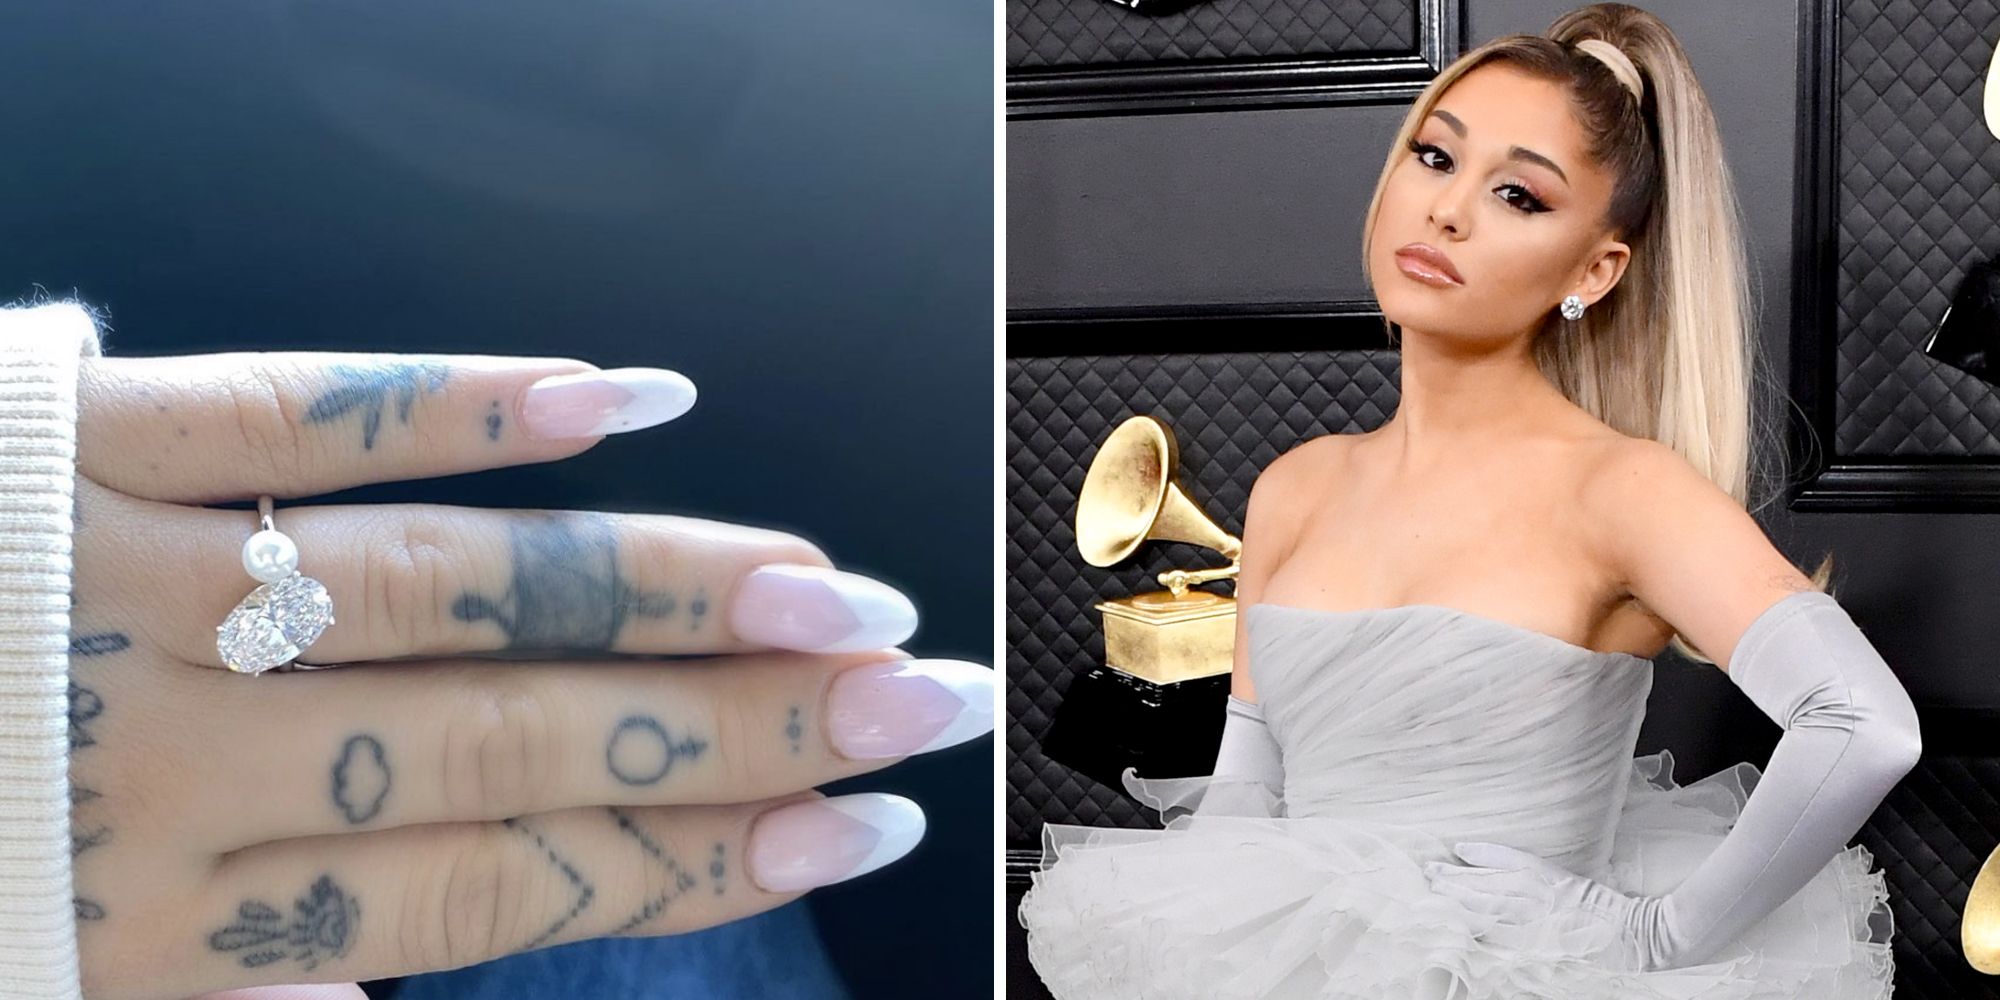 Ariana Grande's Fans Think Her Engagement Ring Is a Family Heirloom